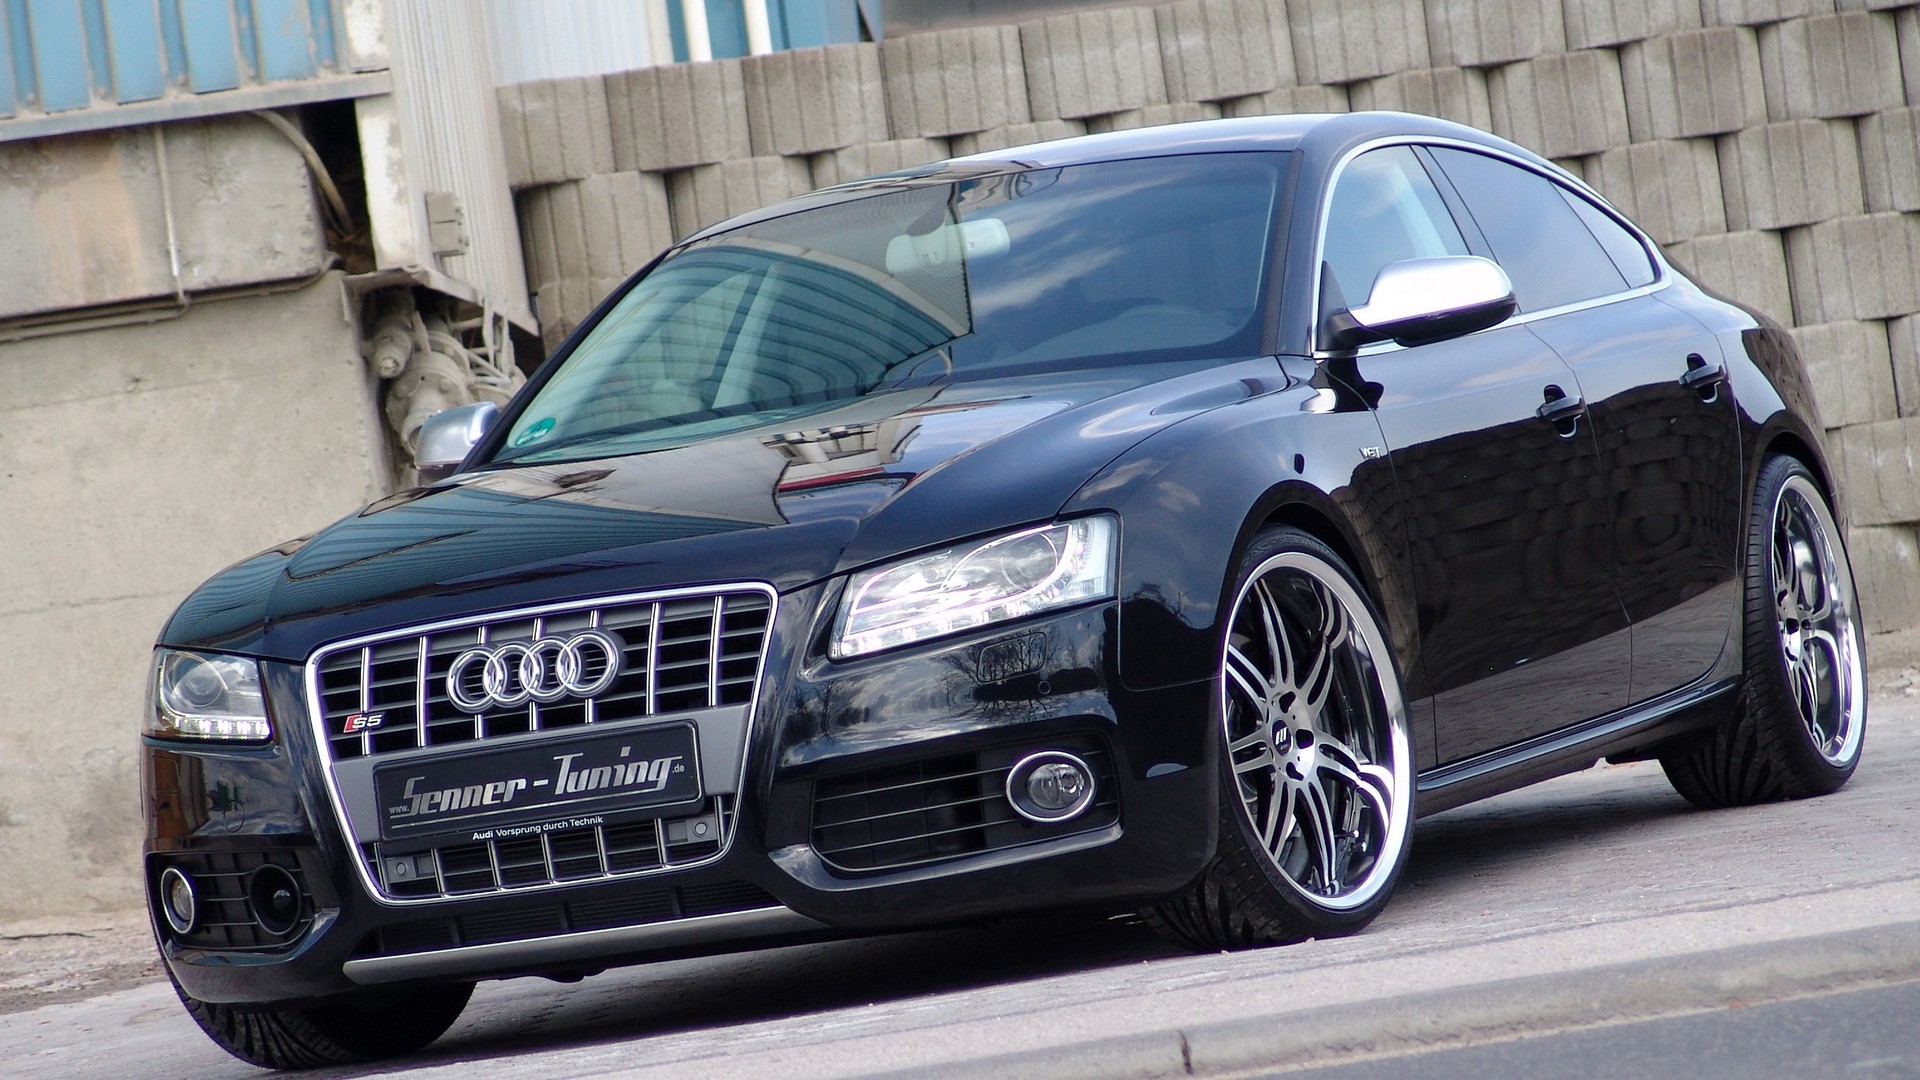 Download full size S5 front Senner-Tuning Audi wallpaper / 1920x1080